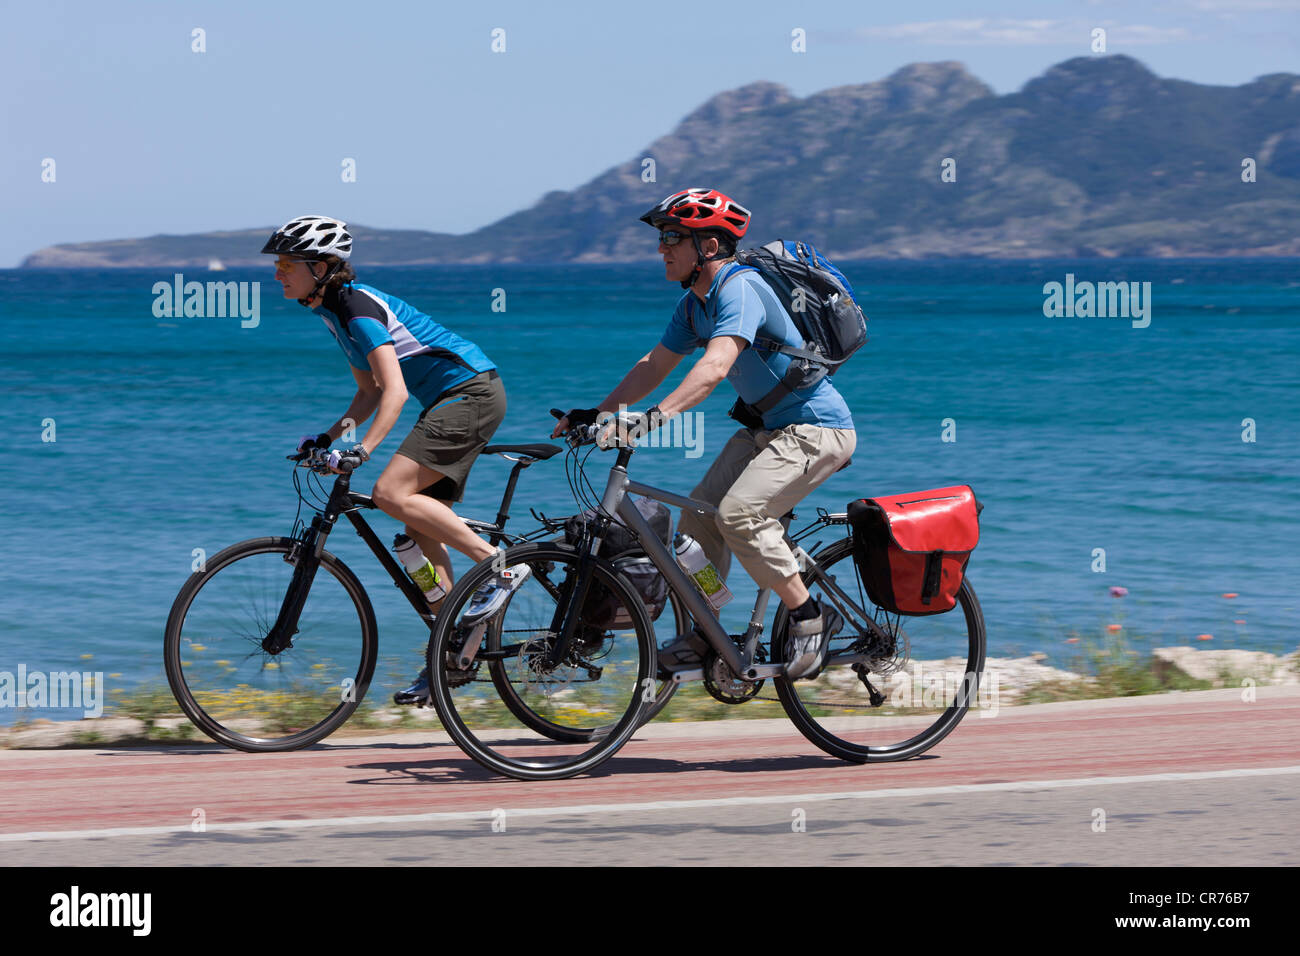 Spain, Mallorca, Man and woman cycling through road by sea Stock Photo